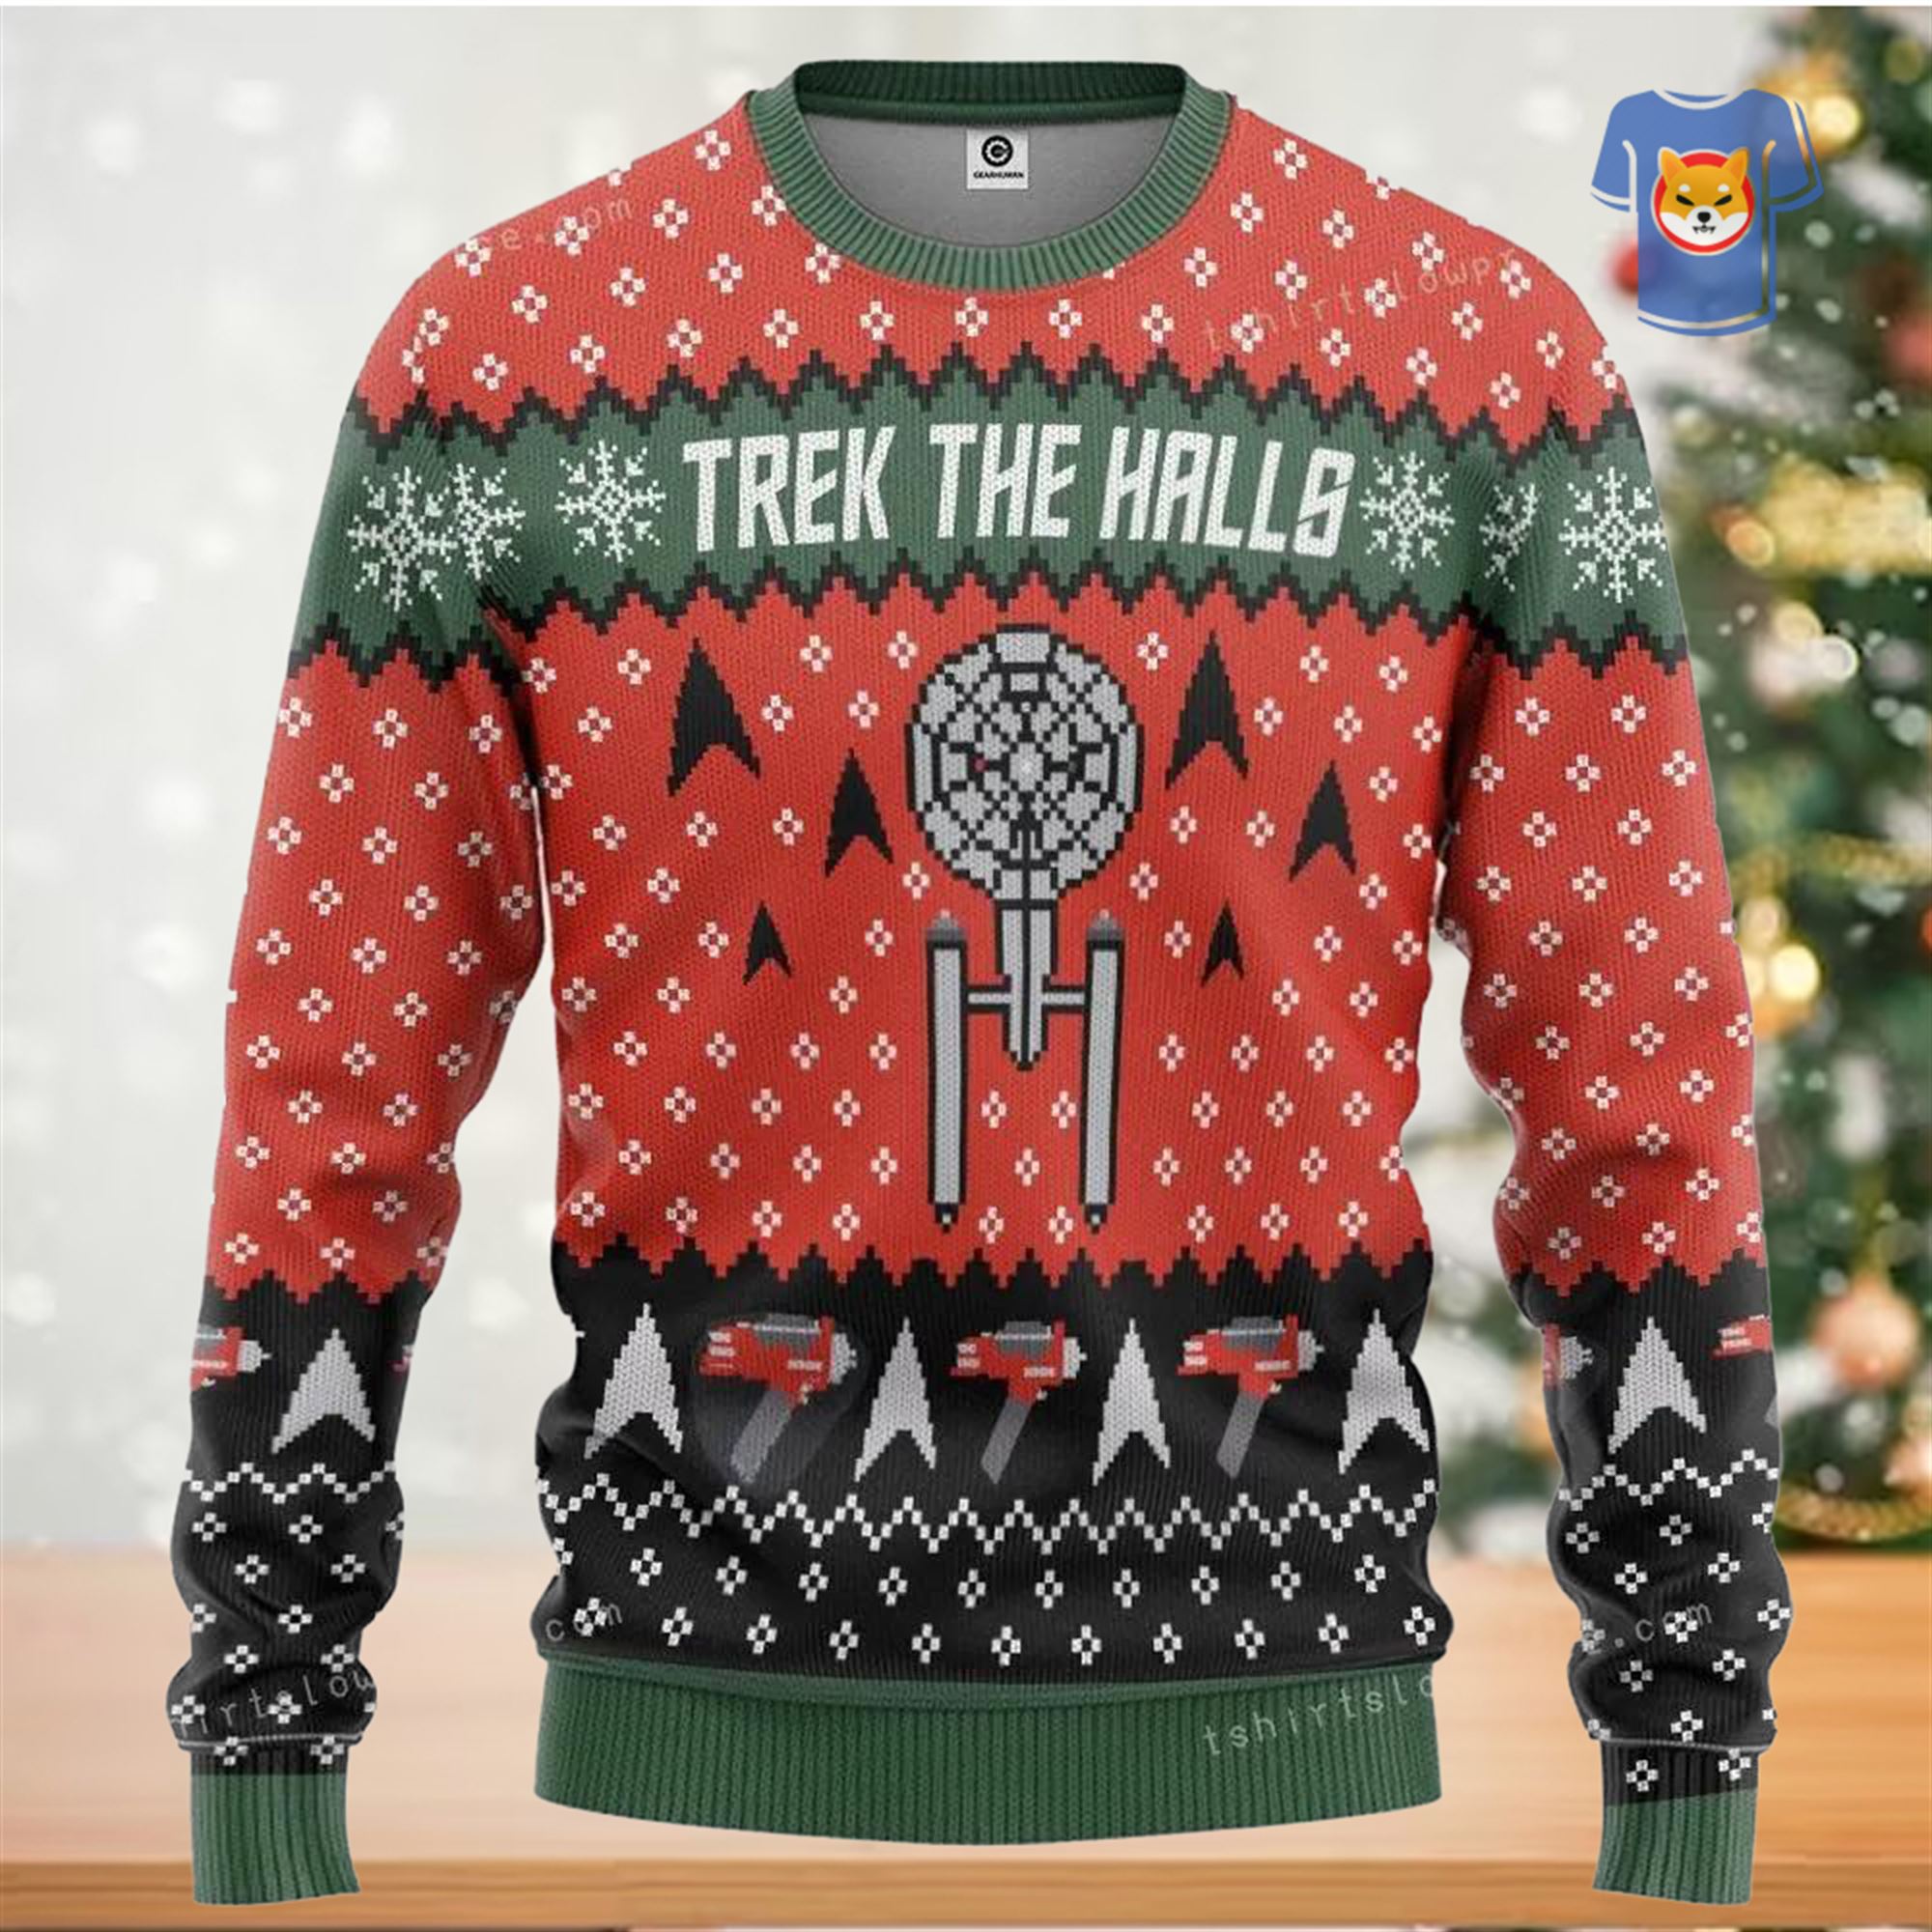 Star Trek Trek The Halls Red Ugly Christmas Sweater Party 